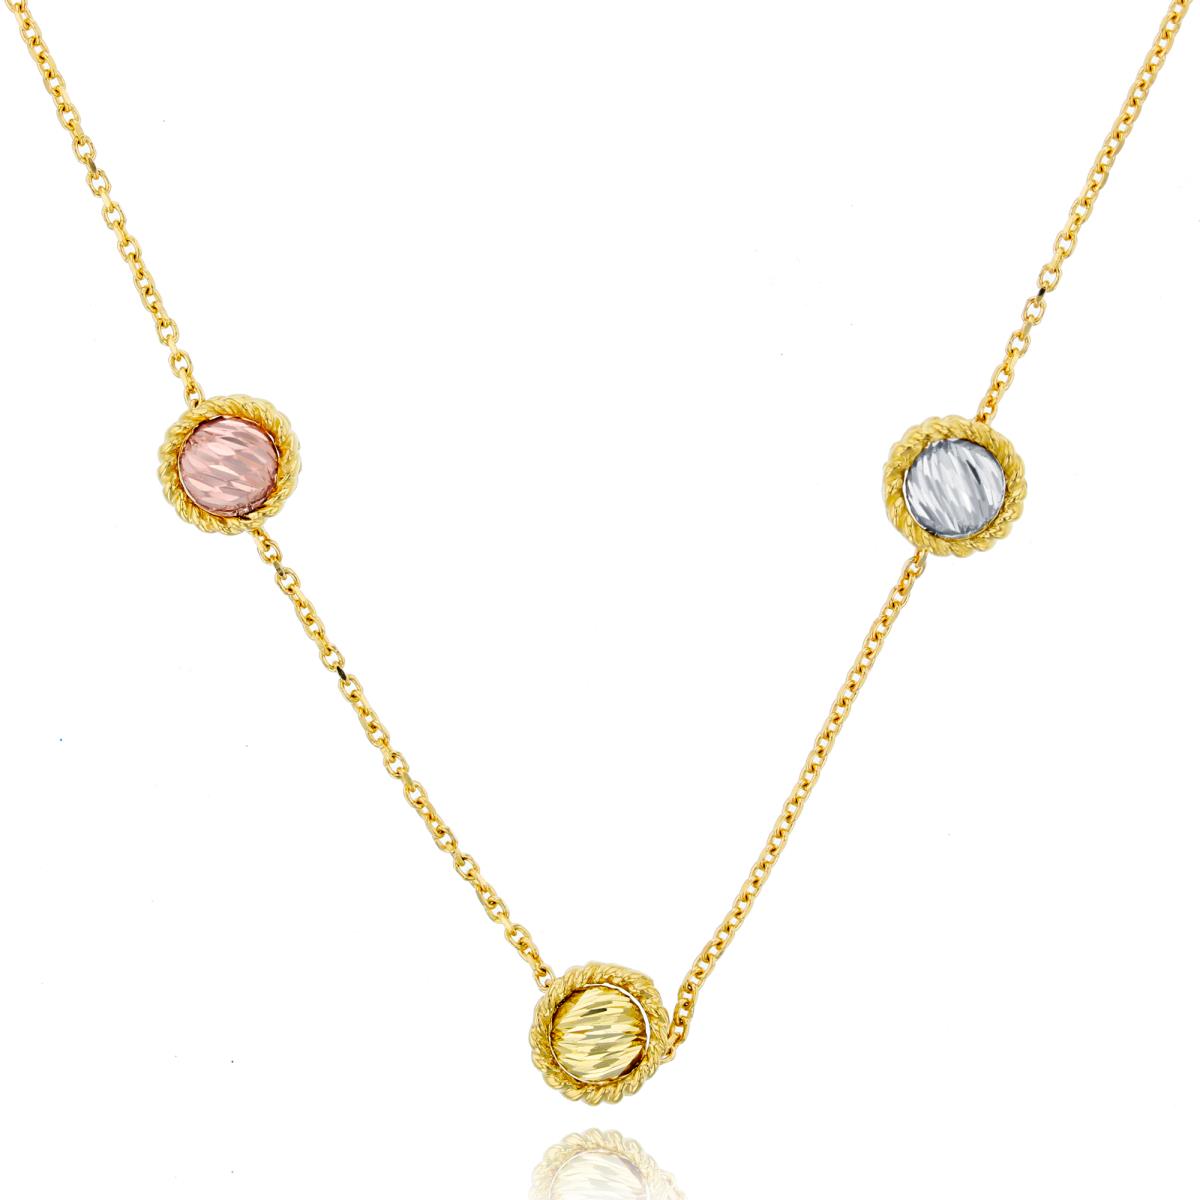 14K Tricolor Wh/Yel/Rose Gold 3-Textured Circles 18" Station Necklace